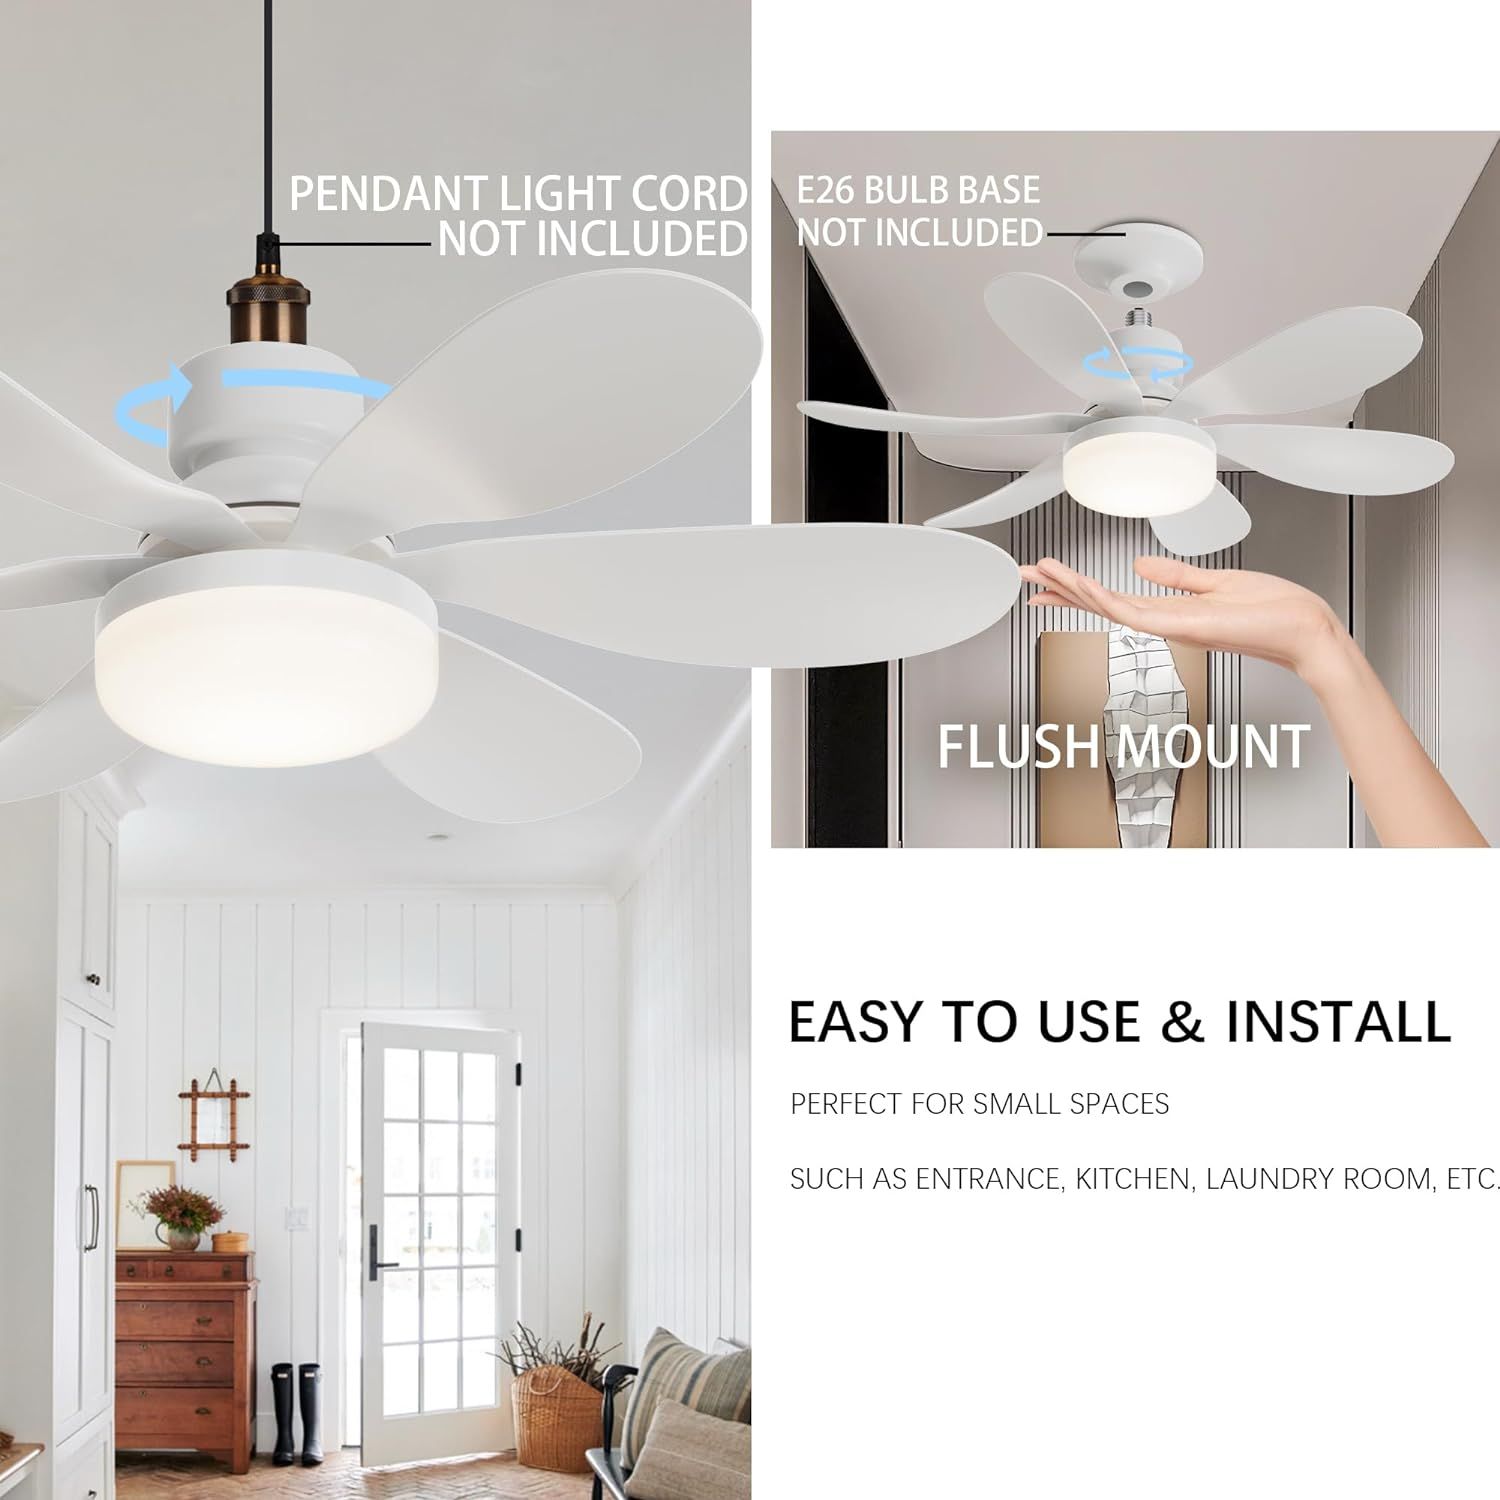 20 inch size of 3 speed light bulb socket ceiling fan easy to use and install